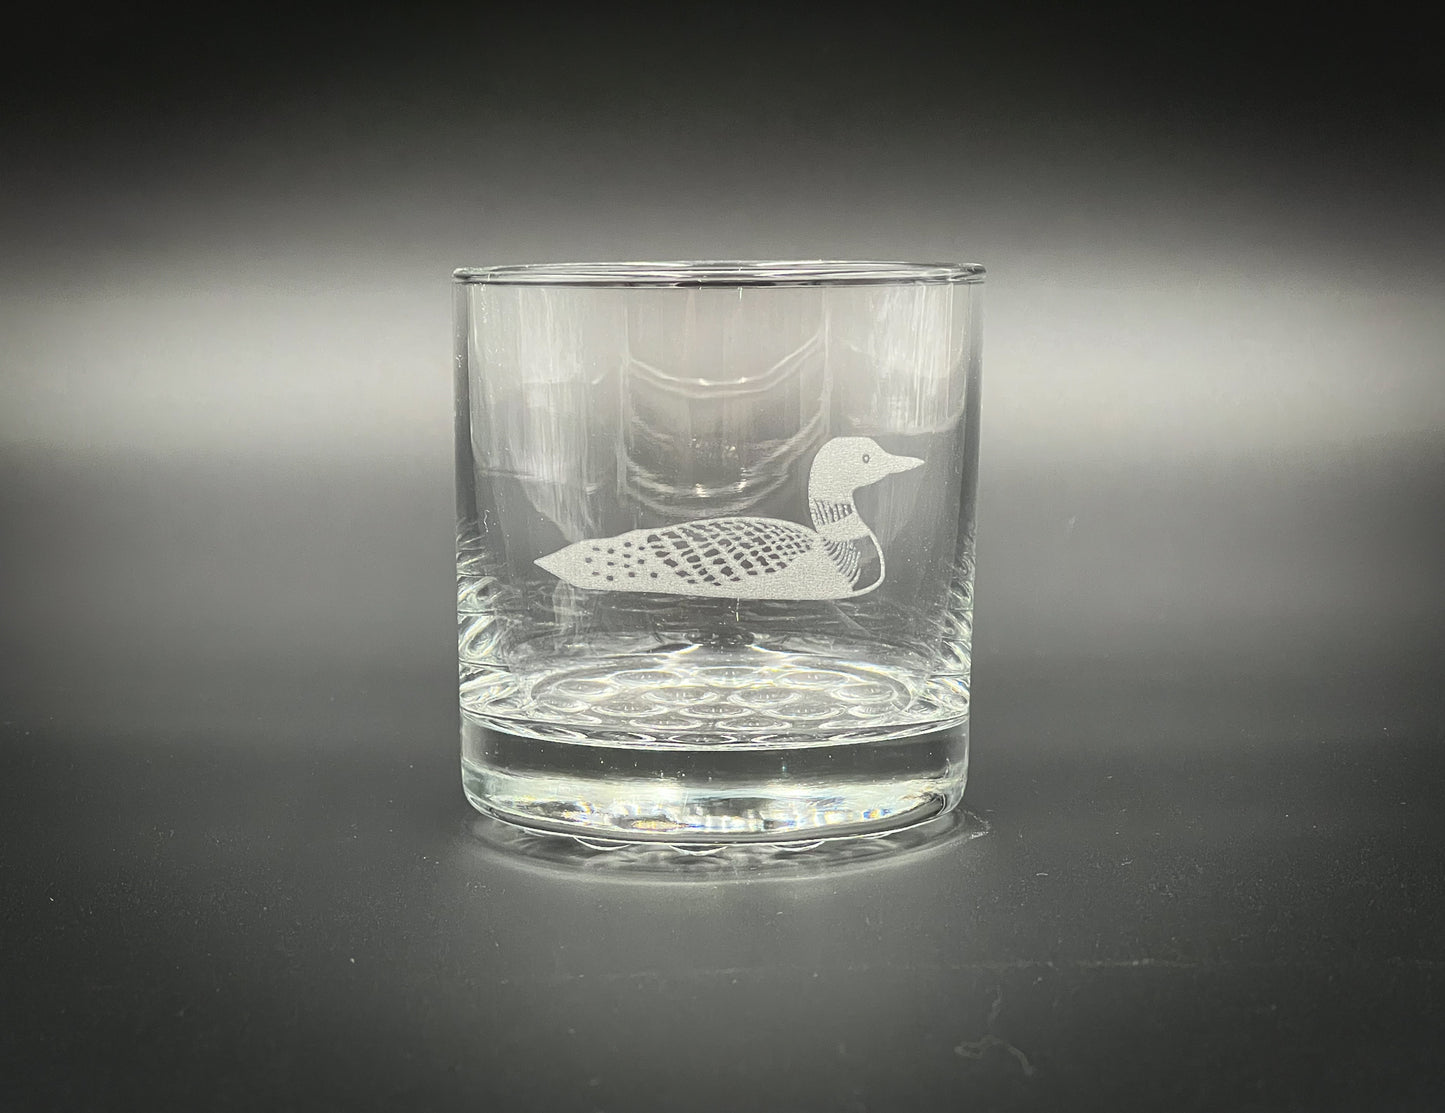 Loon - 10.25 oz Rocks Glass - Gifts for him